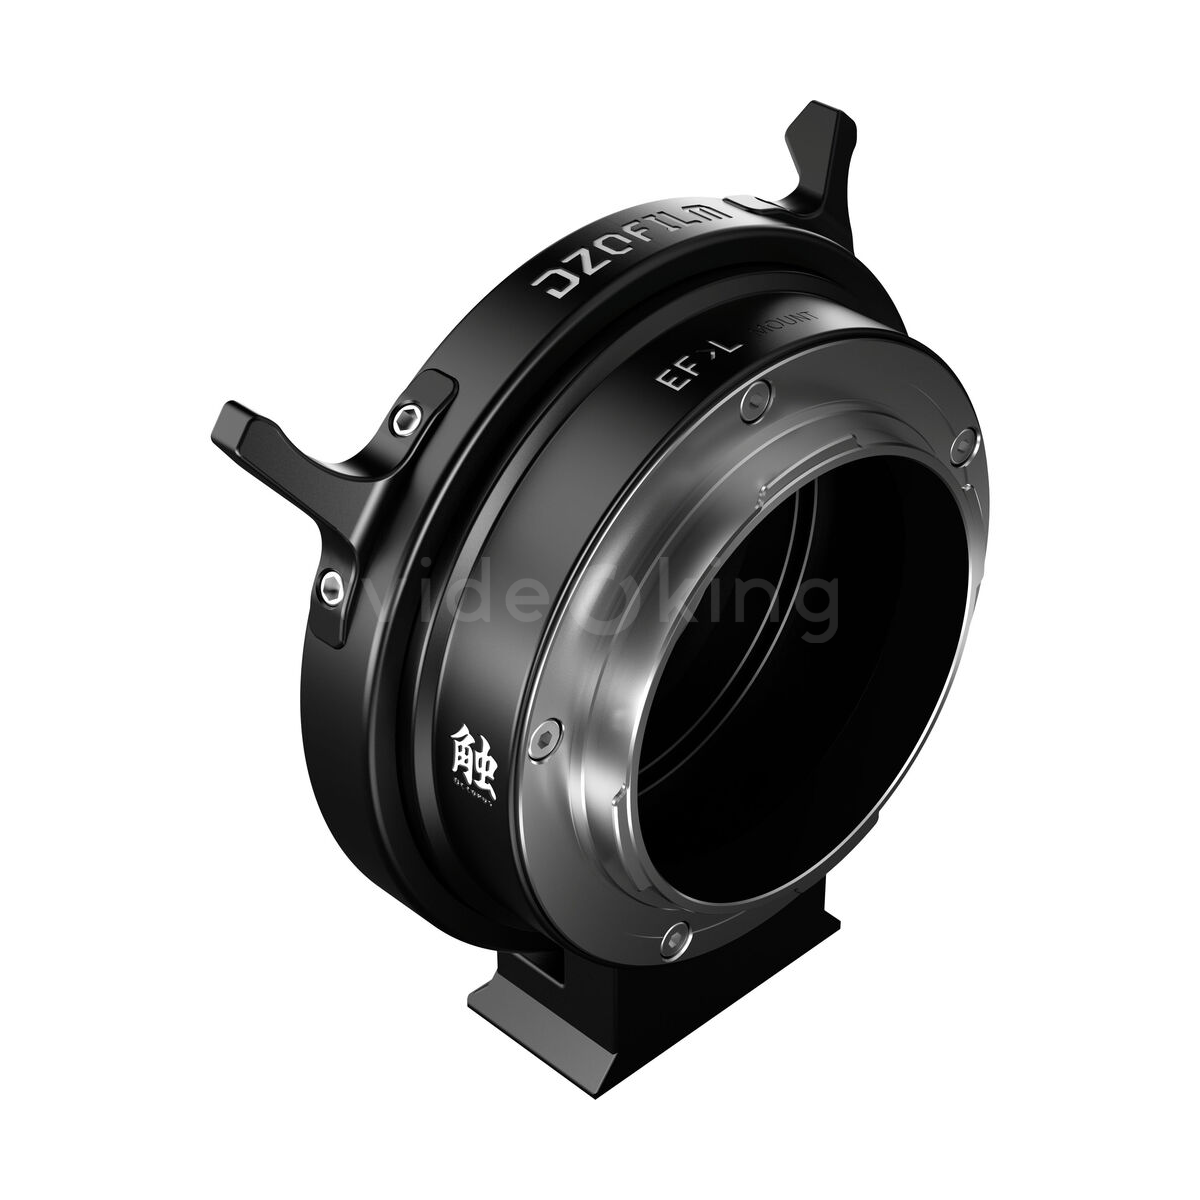 DZOFilm Octopus Adapter (EF-Mount Lens to L-Mount Camera)